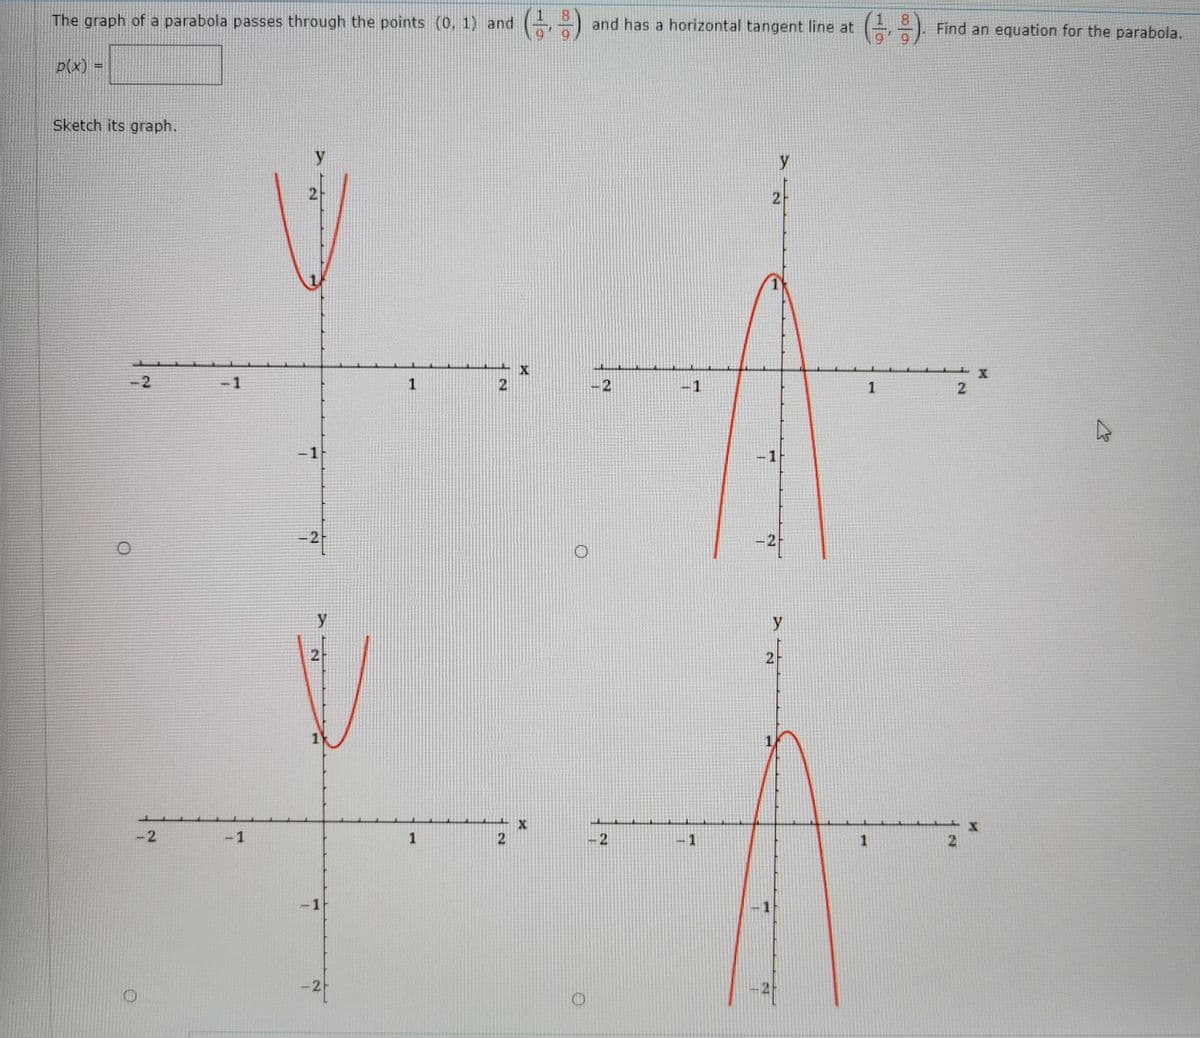 The graph of a parabola passes through the points (0, 1) and ( )
8.
and has a horizontal tangent line at
1 8
Find an equation for the parabola.
p(x) =
Sketch its graph.
y
2-
-2
-1
-2
-1
1
-1
-1
2
y
-2
-1
2.
-1
-1
-2
2.
2.
2.
1.
2.
2.
1.
